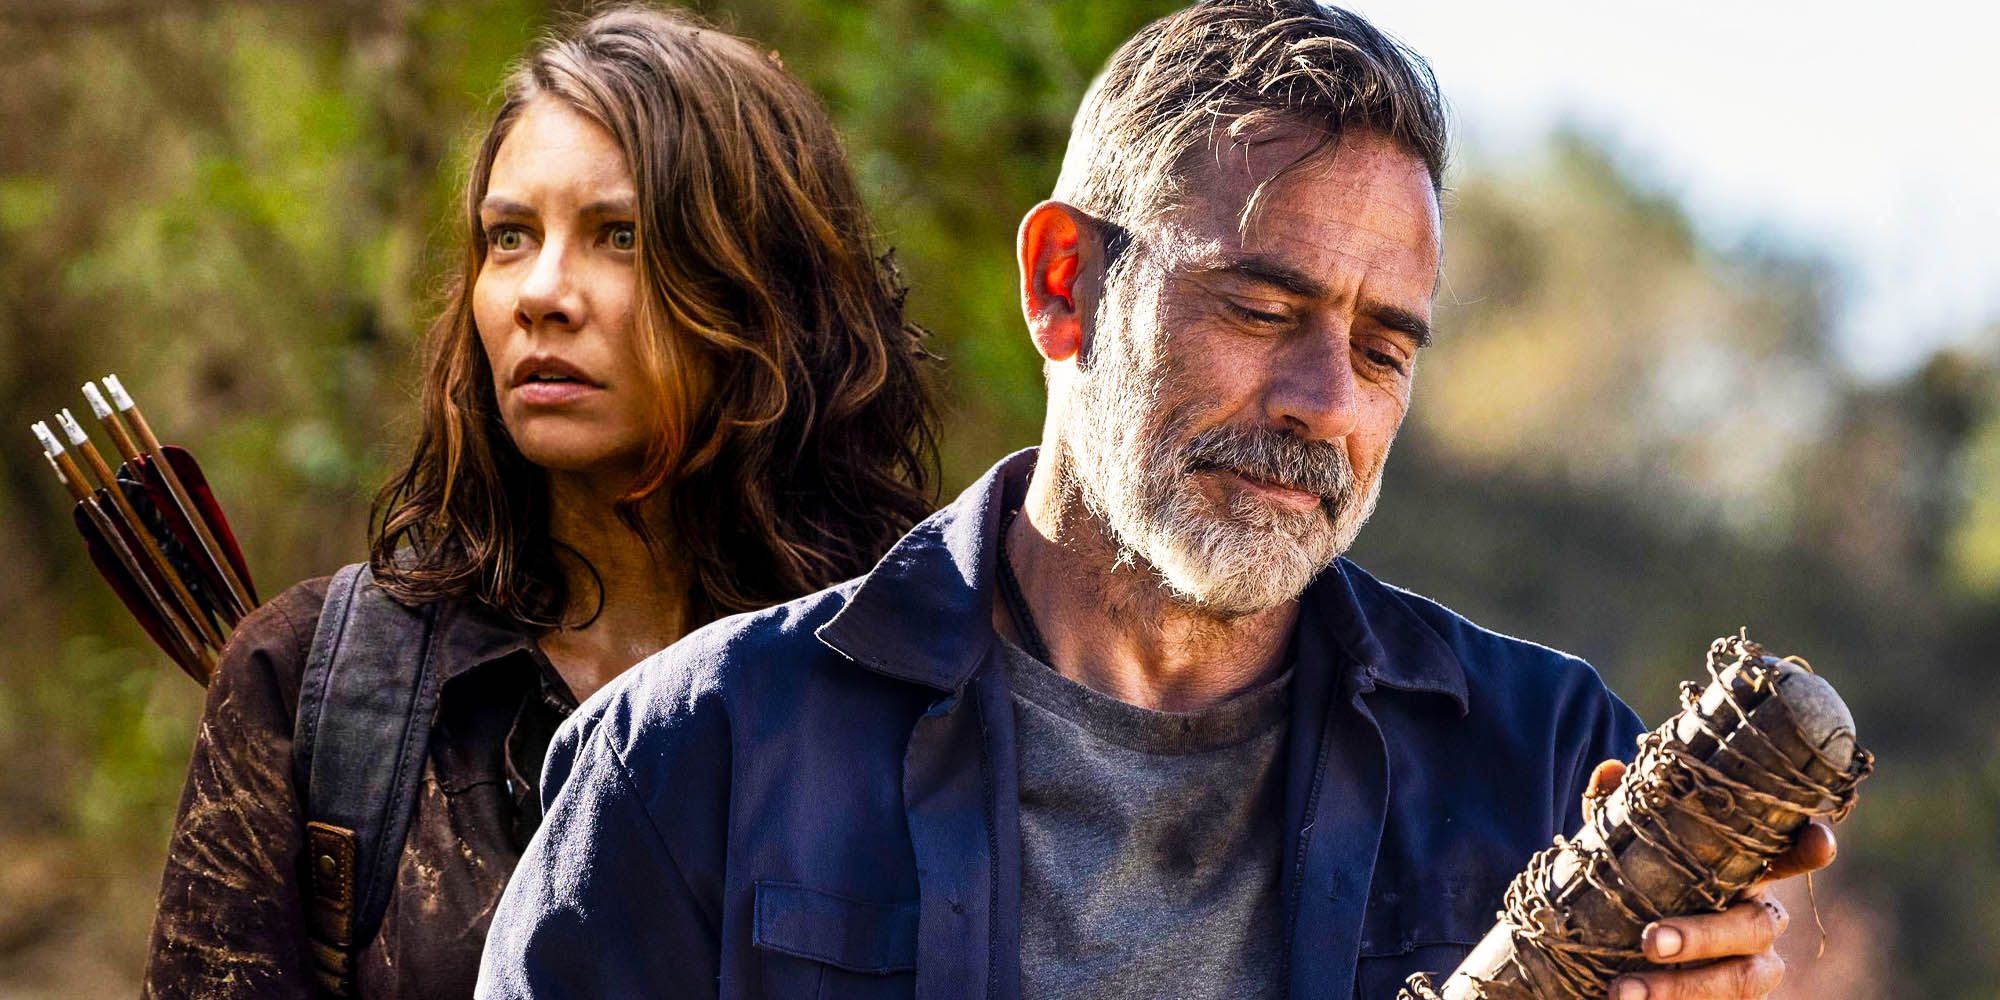 The Walking Dead Why A Negan And Maggie Romance Would Be An Awful Idea 0832